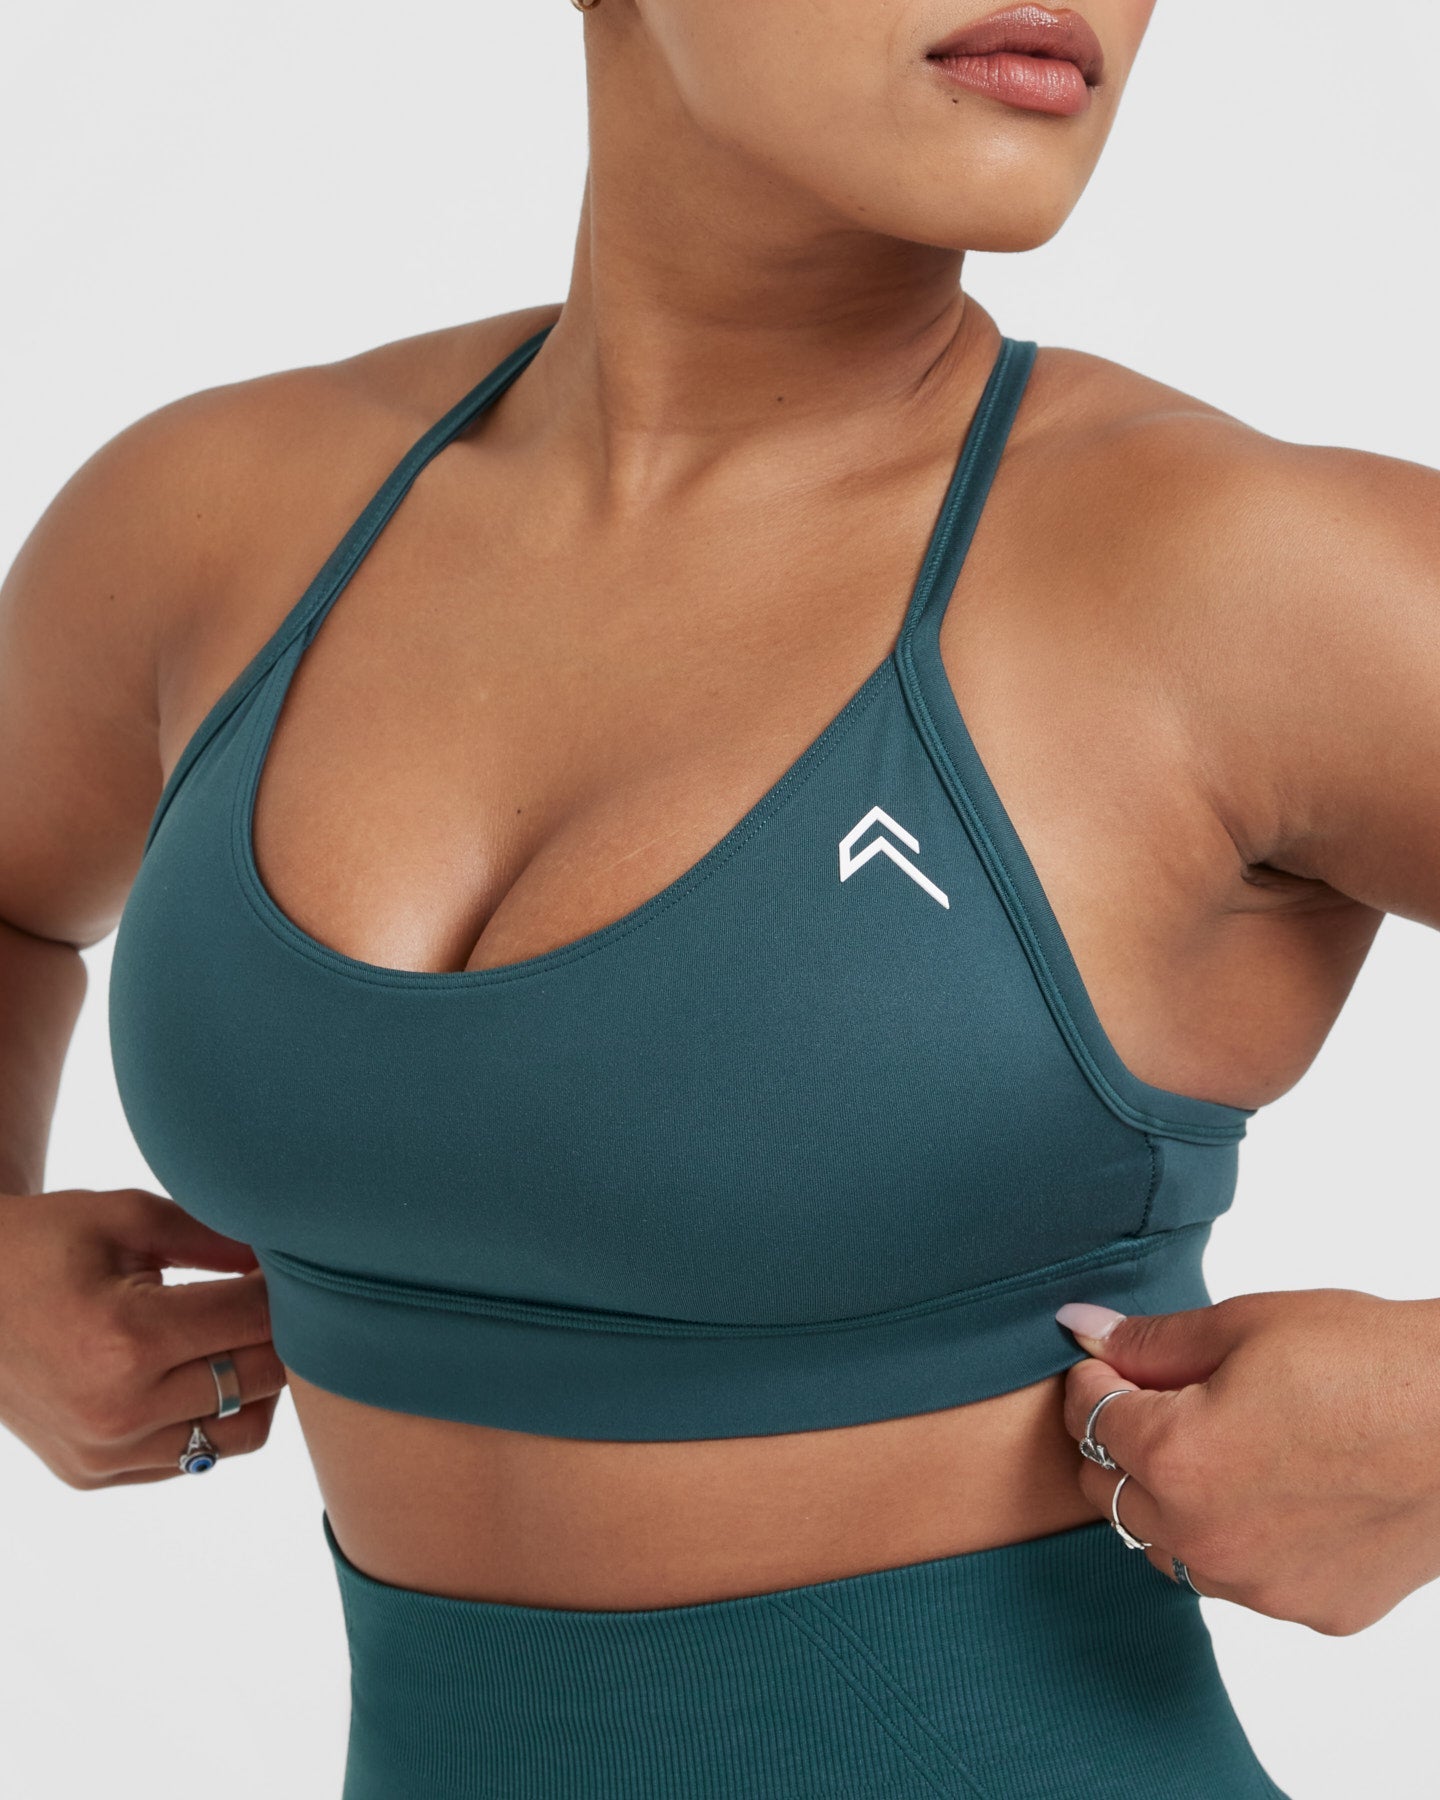 Can I Wear Sports Bra for Swimming? – SILVERWIND